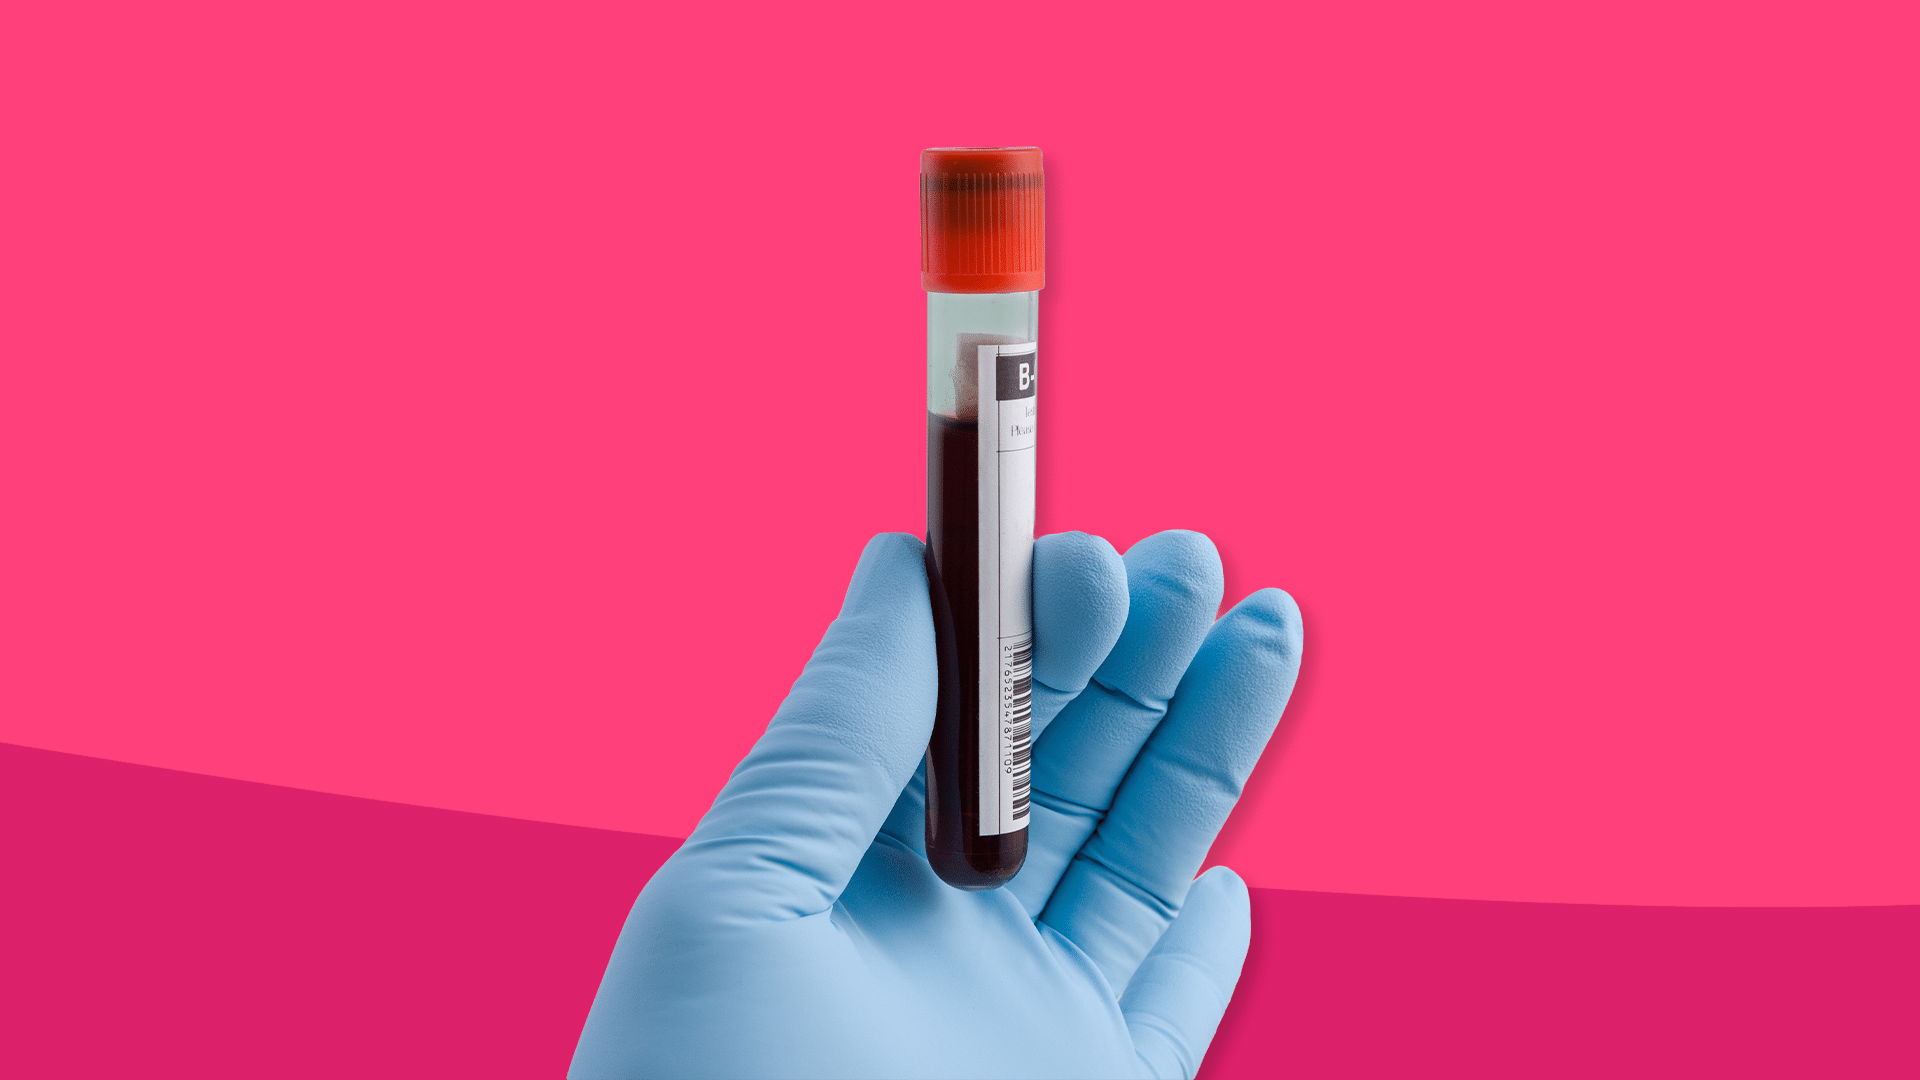 An image of a vial of blood represents bloodletting